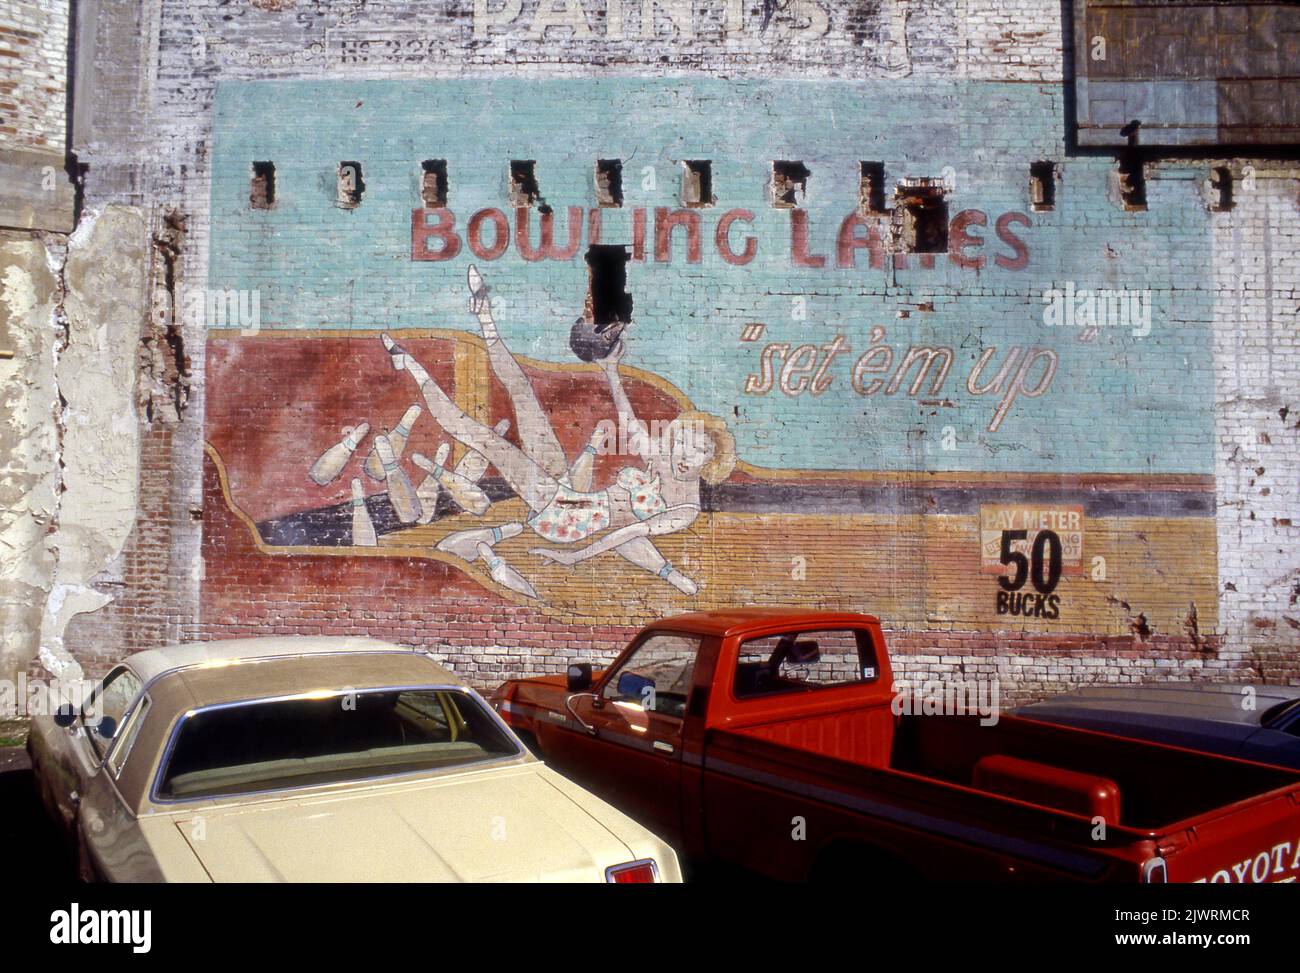 Artist mural depicting a retro bowling scene in downtown Los Angeles, CA,1989 Stock Photo